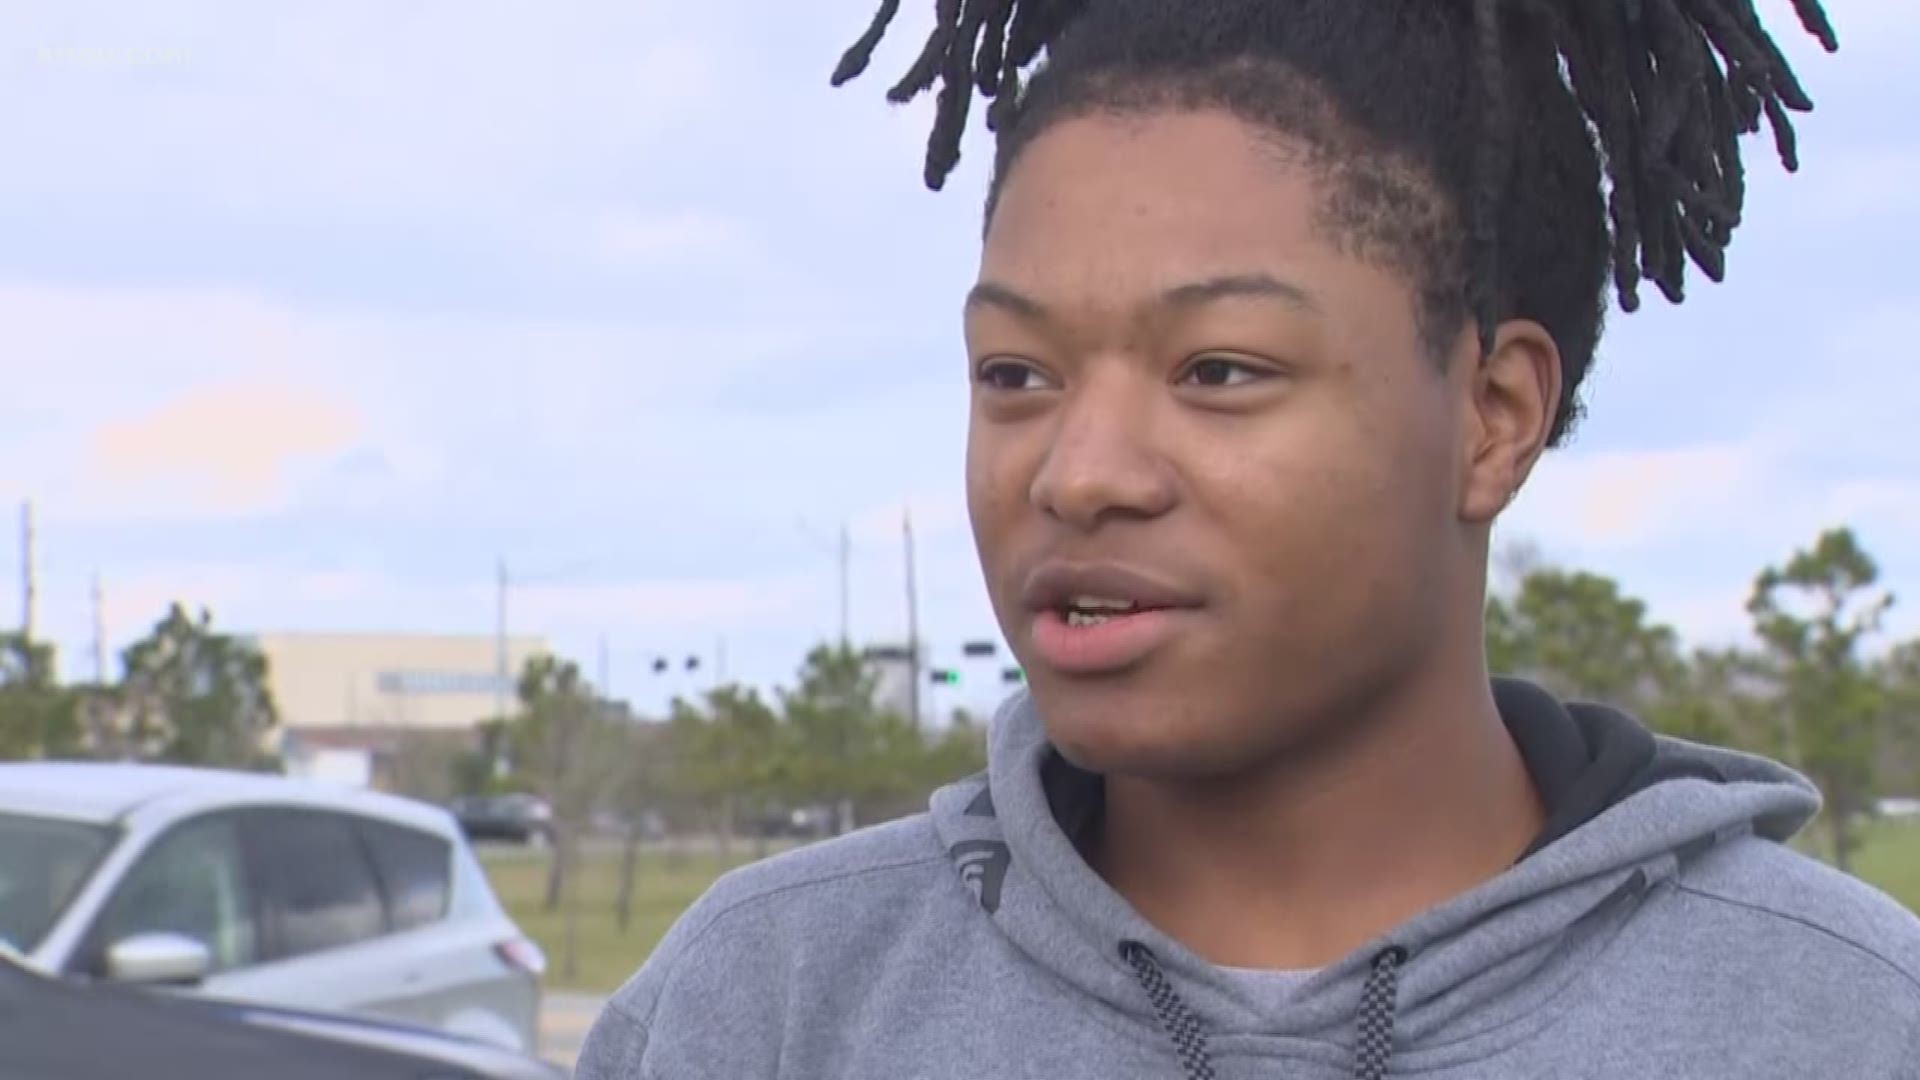 Kaden Bradford is DeAndre Arnold's cousin and has been in in-house suspension for the last few days because the district said his hair violates their grooming code.